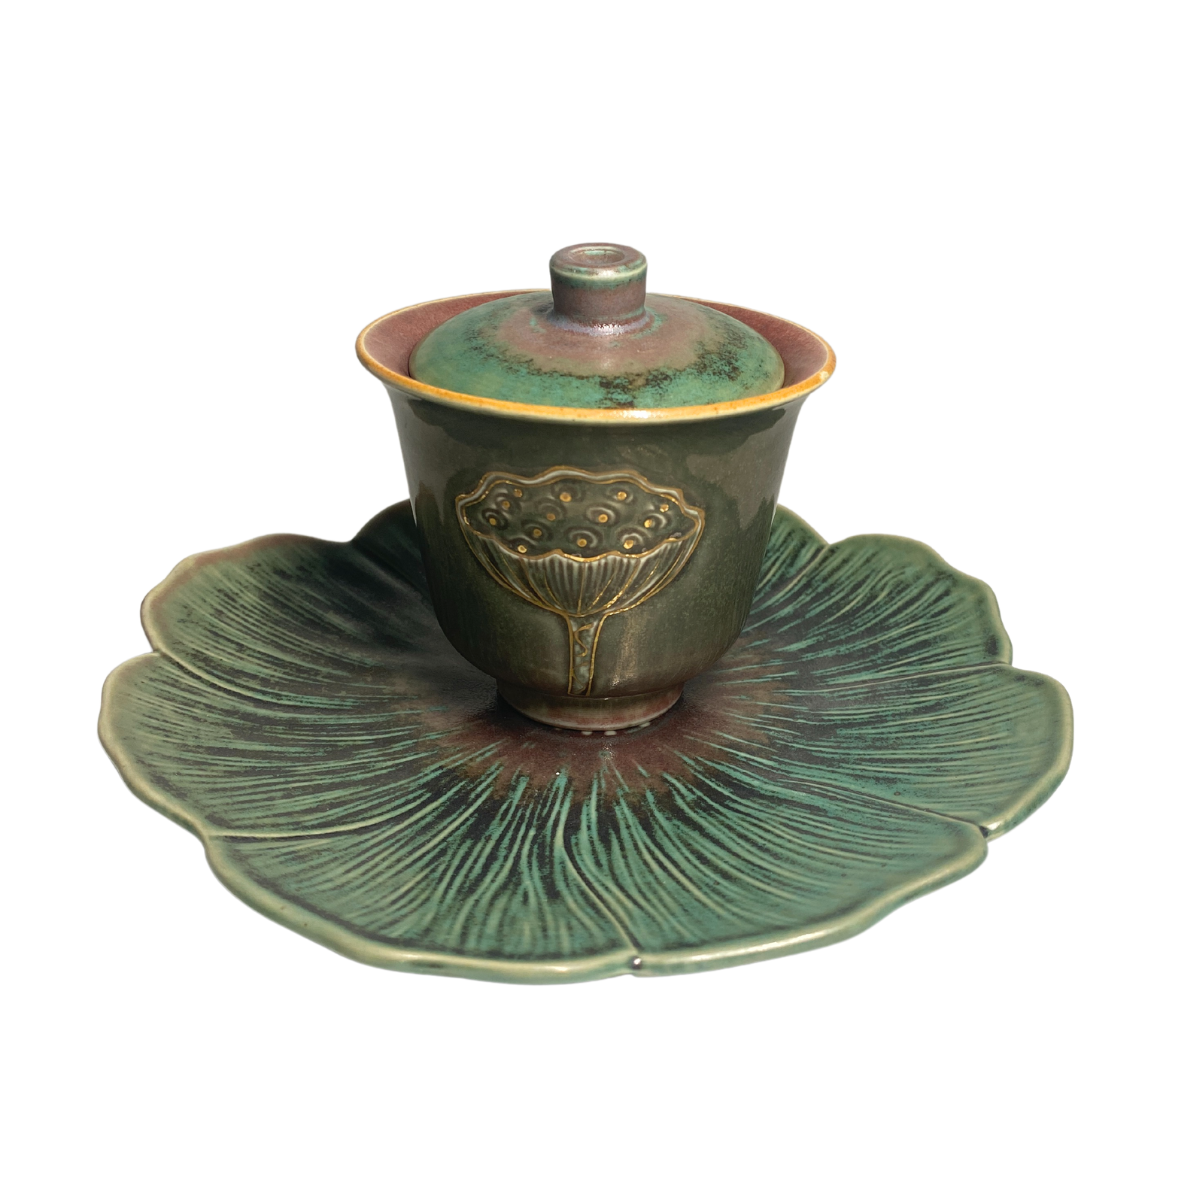 JDZ 1 Lotus Tea Cup with a plate